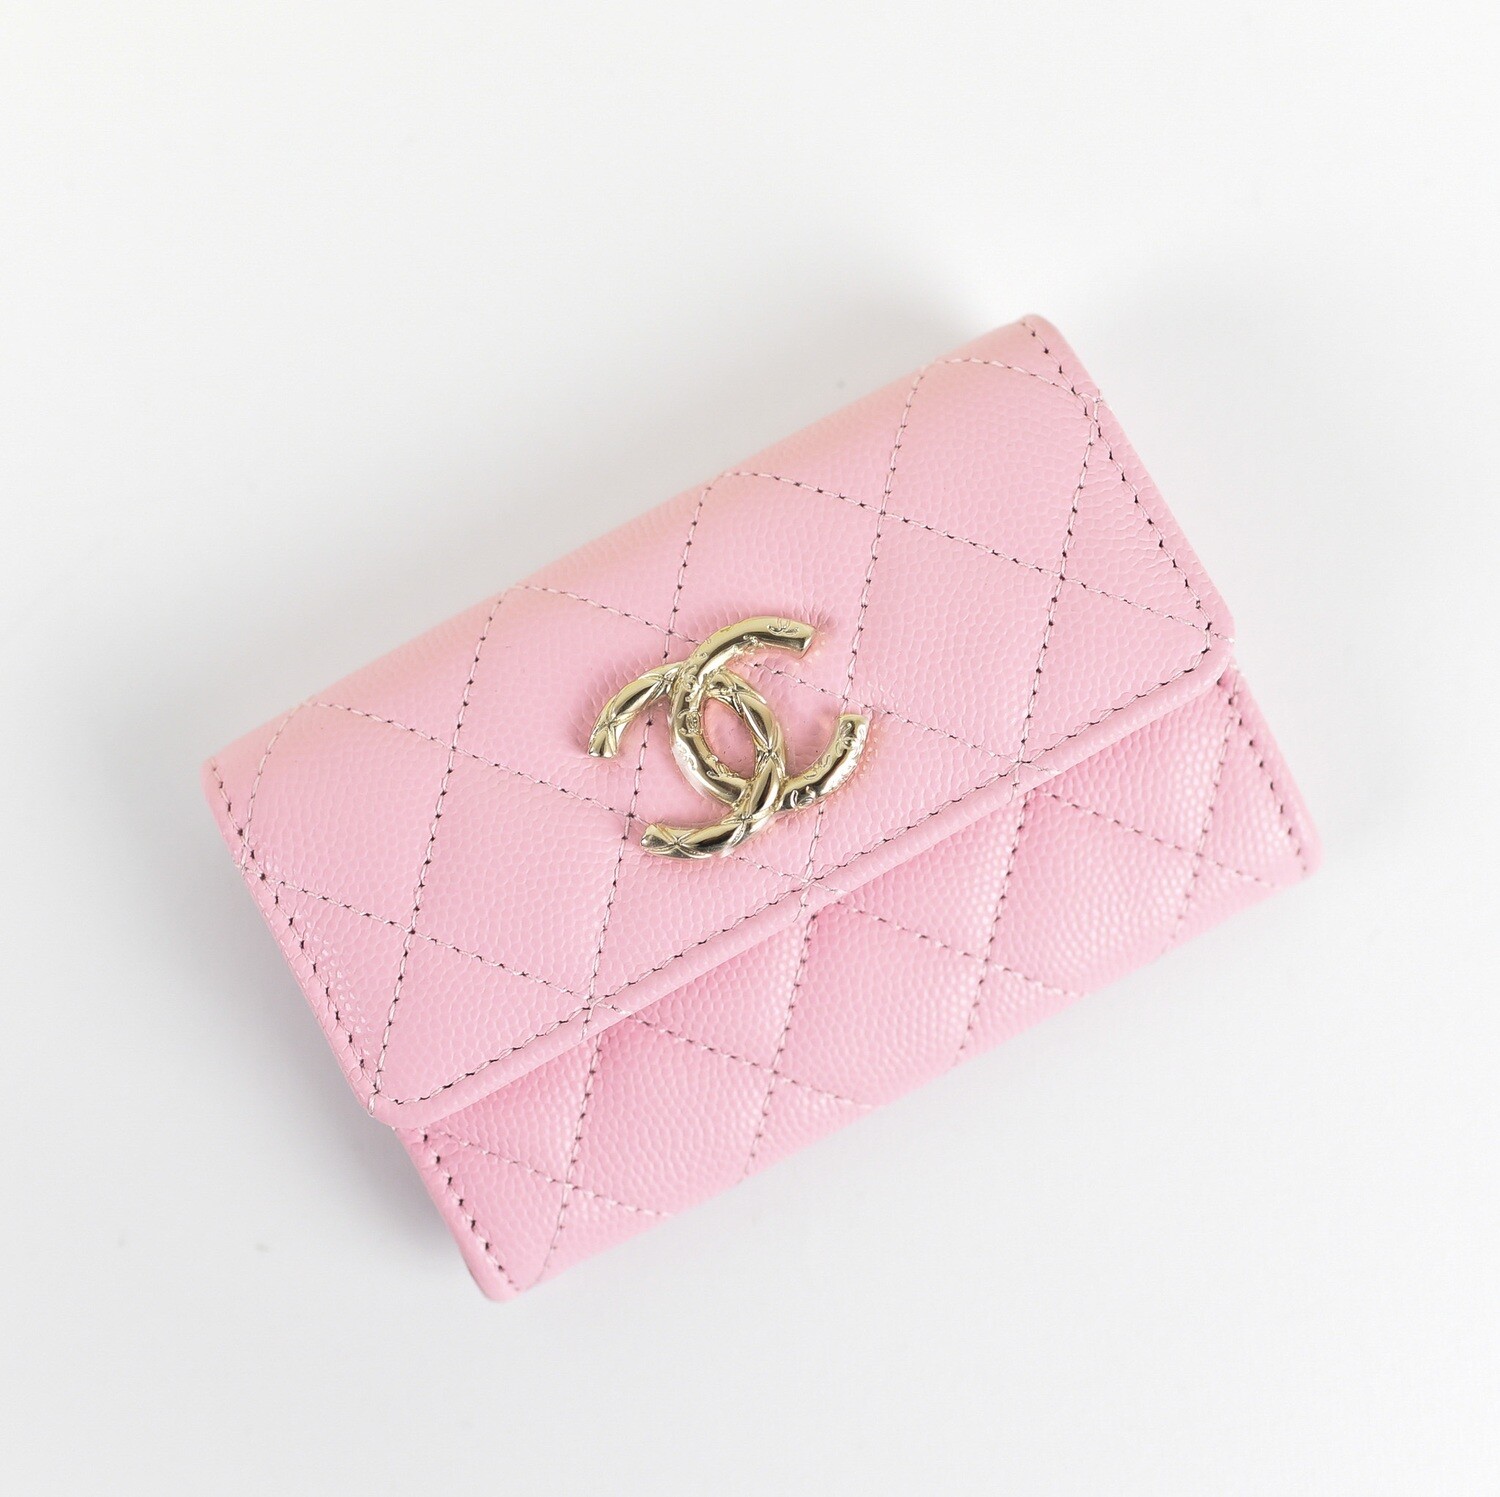 Chanel SLG Snap Cardholder with Large CC, Pink Caviar with Gold Hardware, New in Box GA001